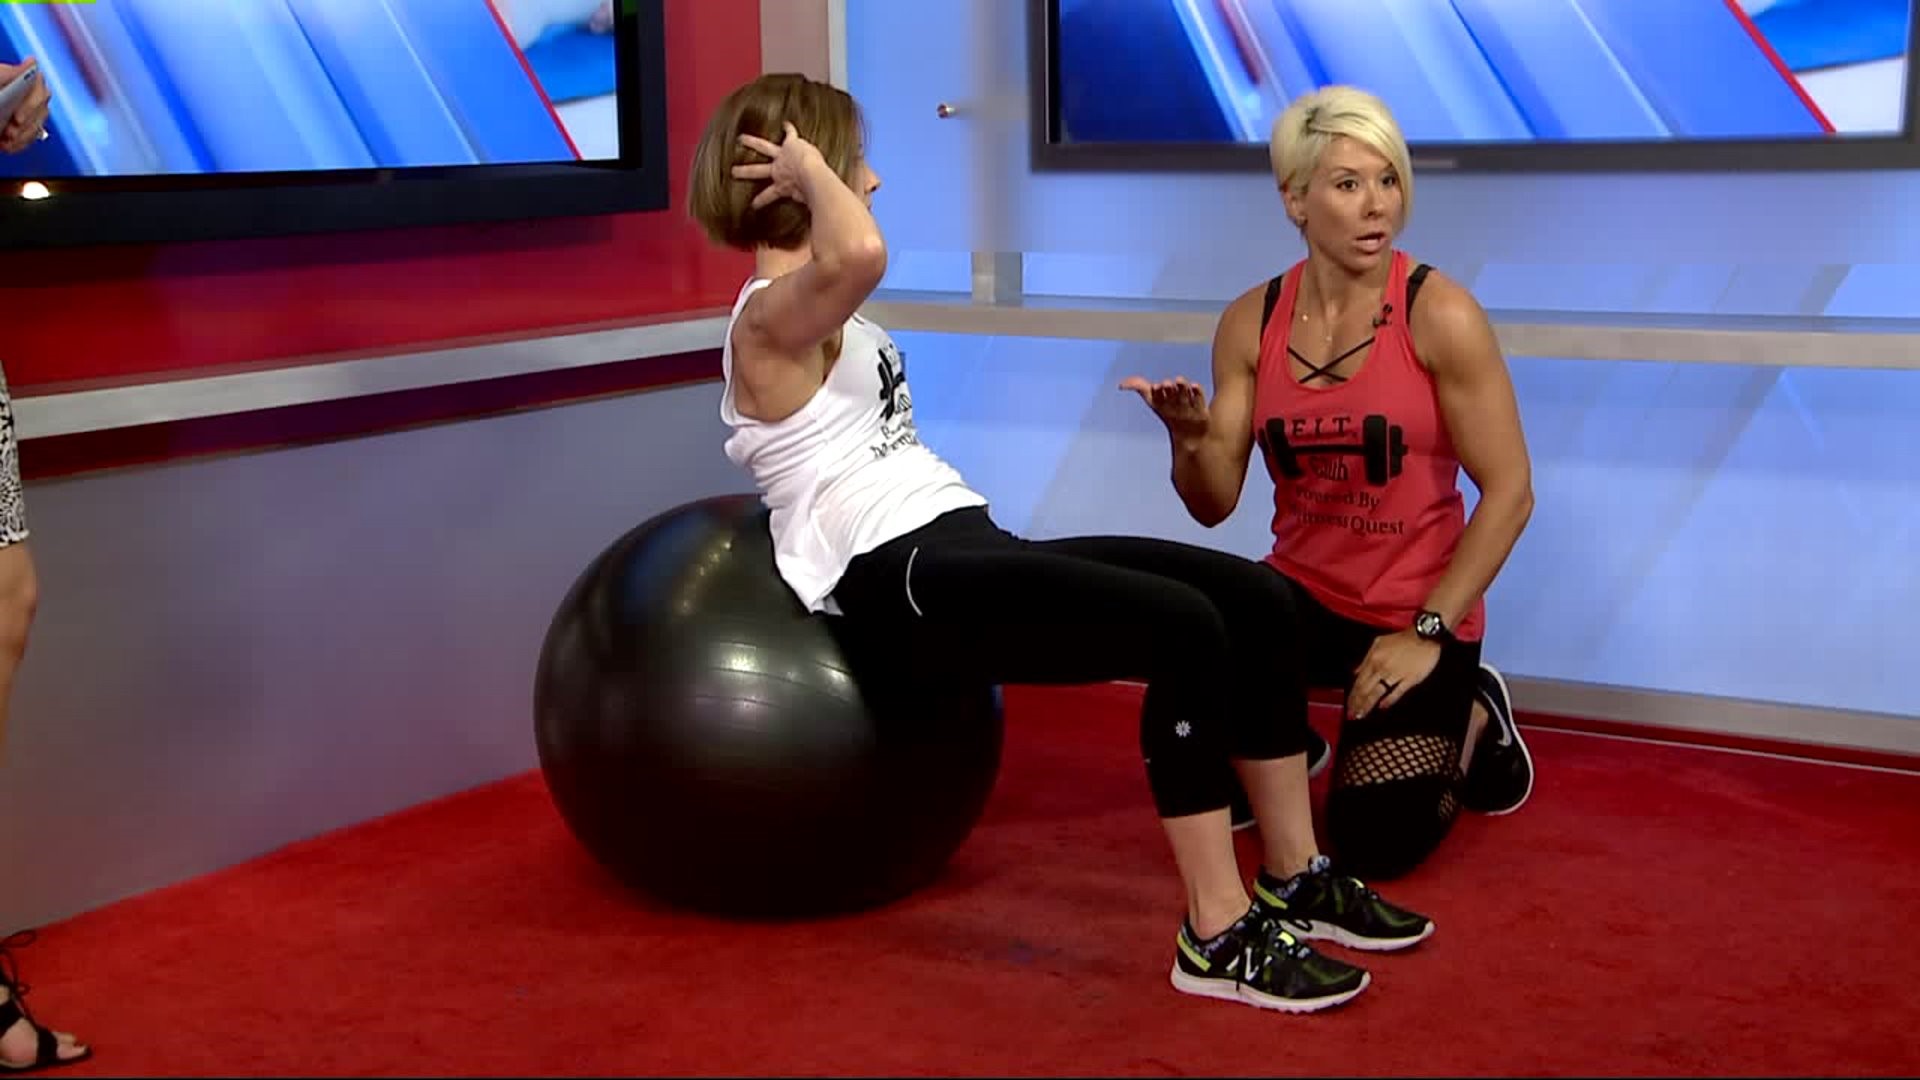 MyFitnessQuest trainers demonstrate F.I.T. Mobility training